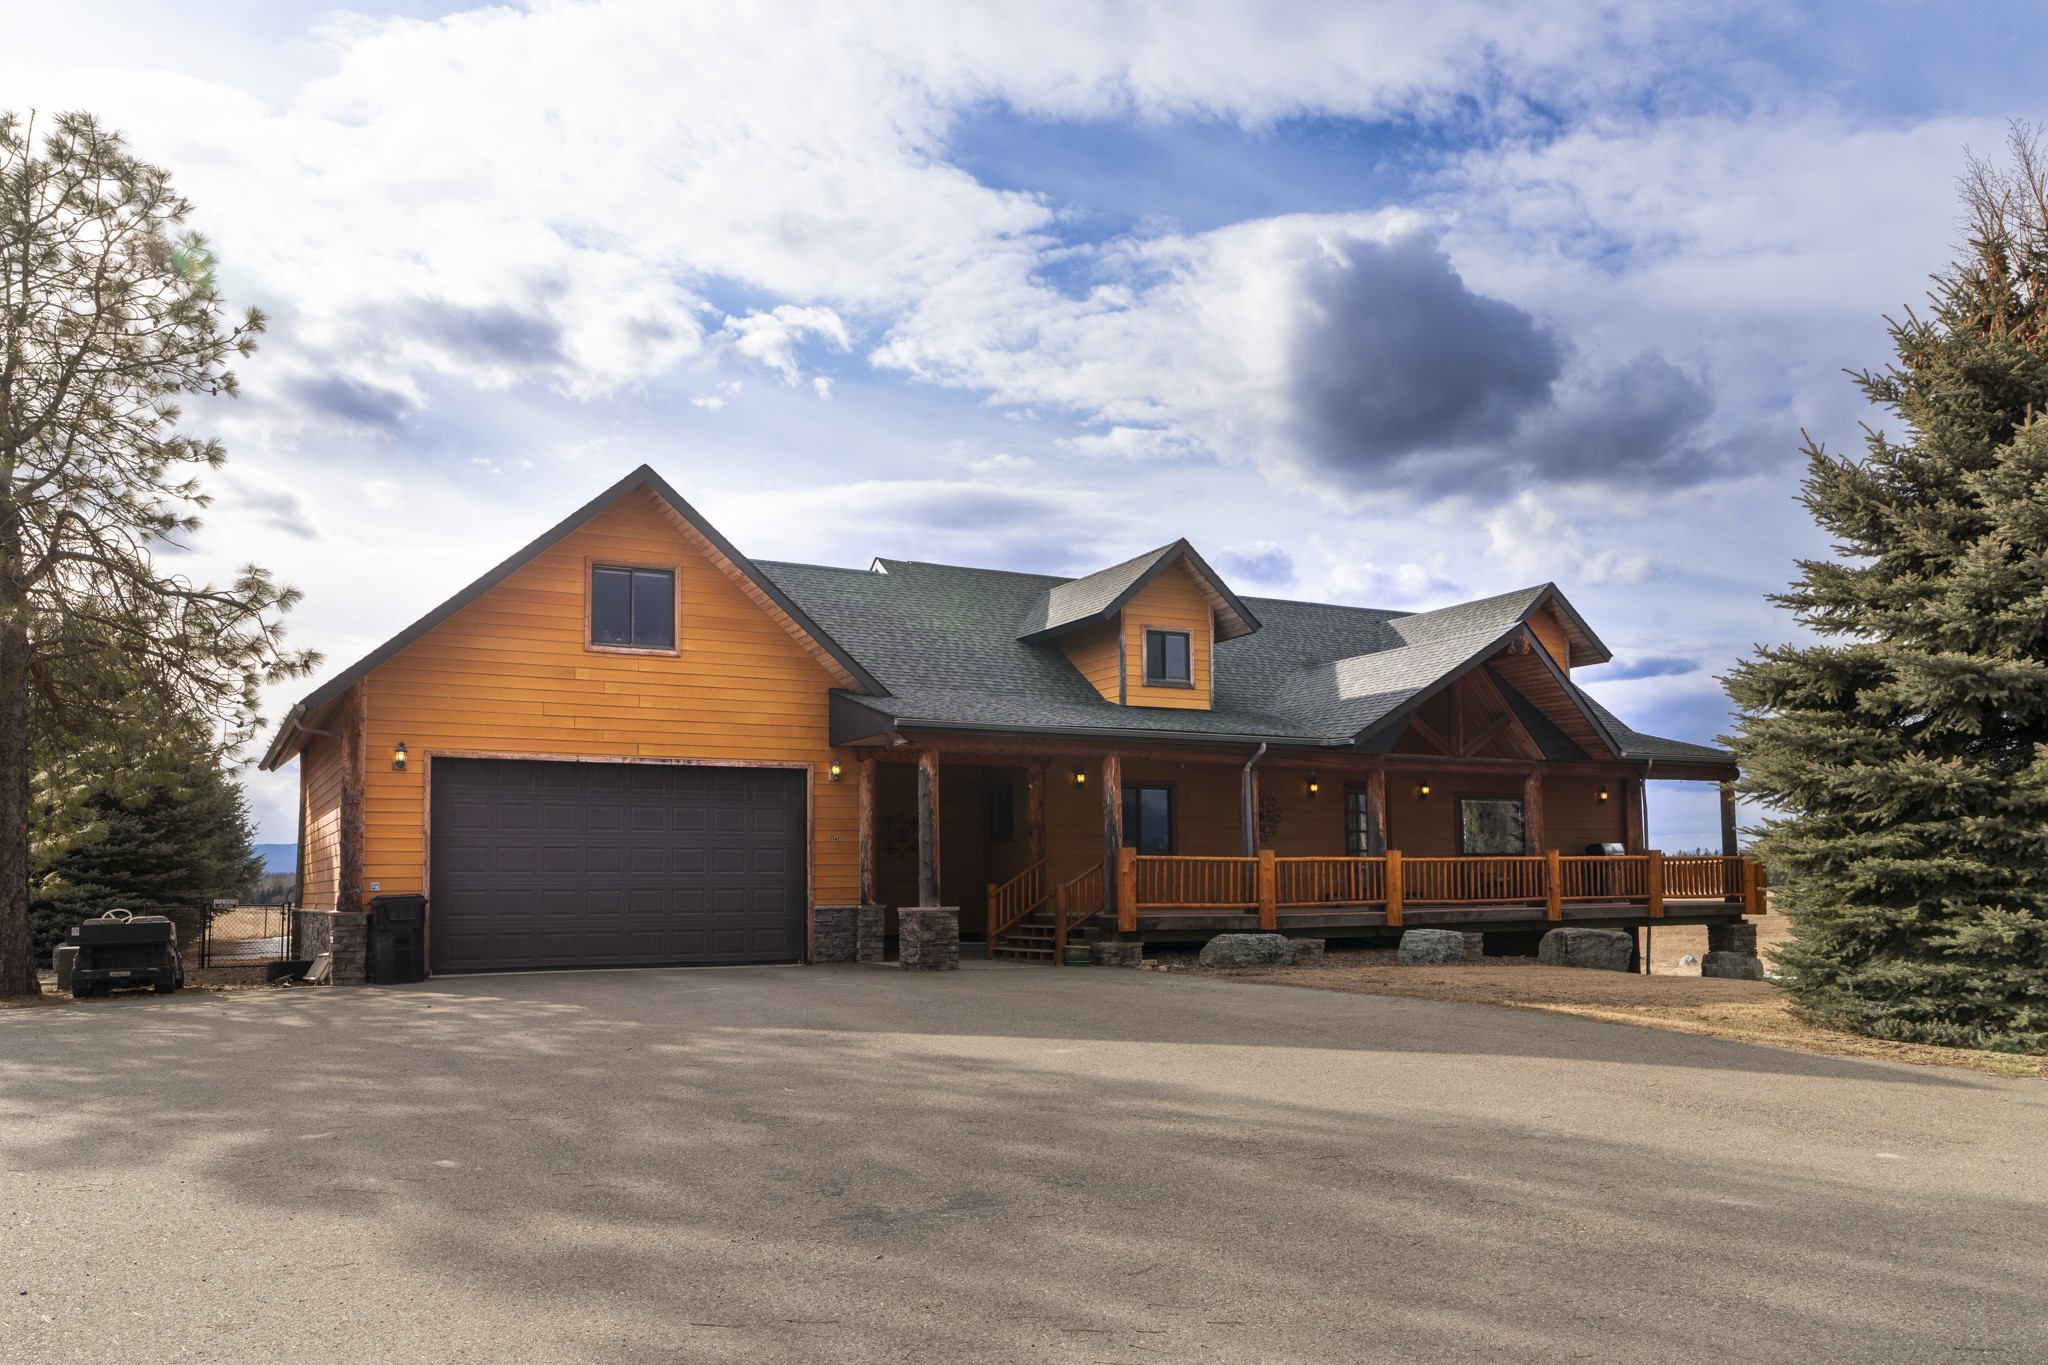 This unique, one-of-a-kind property fronting HWY 2 just north of airport, is zoned Scenic Corridor so it can be used for a multitude of options, such as commercial, light industrial, ag, and more. The property includes a
Spectacular Montana-style home on just over 48 acres with 3 BDS & 2.5 BTHS in main living area, and a full walkout basement apartment with 2BDS, 1 BTH, kitchen and laundry. Both levels have separate entrances, spacious, open-concept floor plans and extra insulation for sound-proofing. Large, partially covered wrap-around deck with views of ski area, mountains, and Glacier Park for all your outdoor entertaining. Home and apartment have been used for successful short-term rentals due to close proximity to airport. Horse enclosure/lean-tos have corral and attached divided fenced areas for multiple animals.  So many options with this property. A must see! Call Marcie West 406*253*2552or your real estate professional today. Property has a mobile home on it that is currently being rented and is included in sell, possibly no value. Property consists of three tracts of land with three addresses. 103,115,127 Wishart Road. Call for more information.